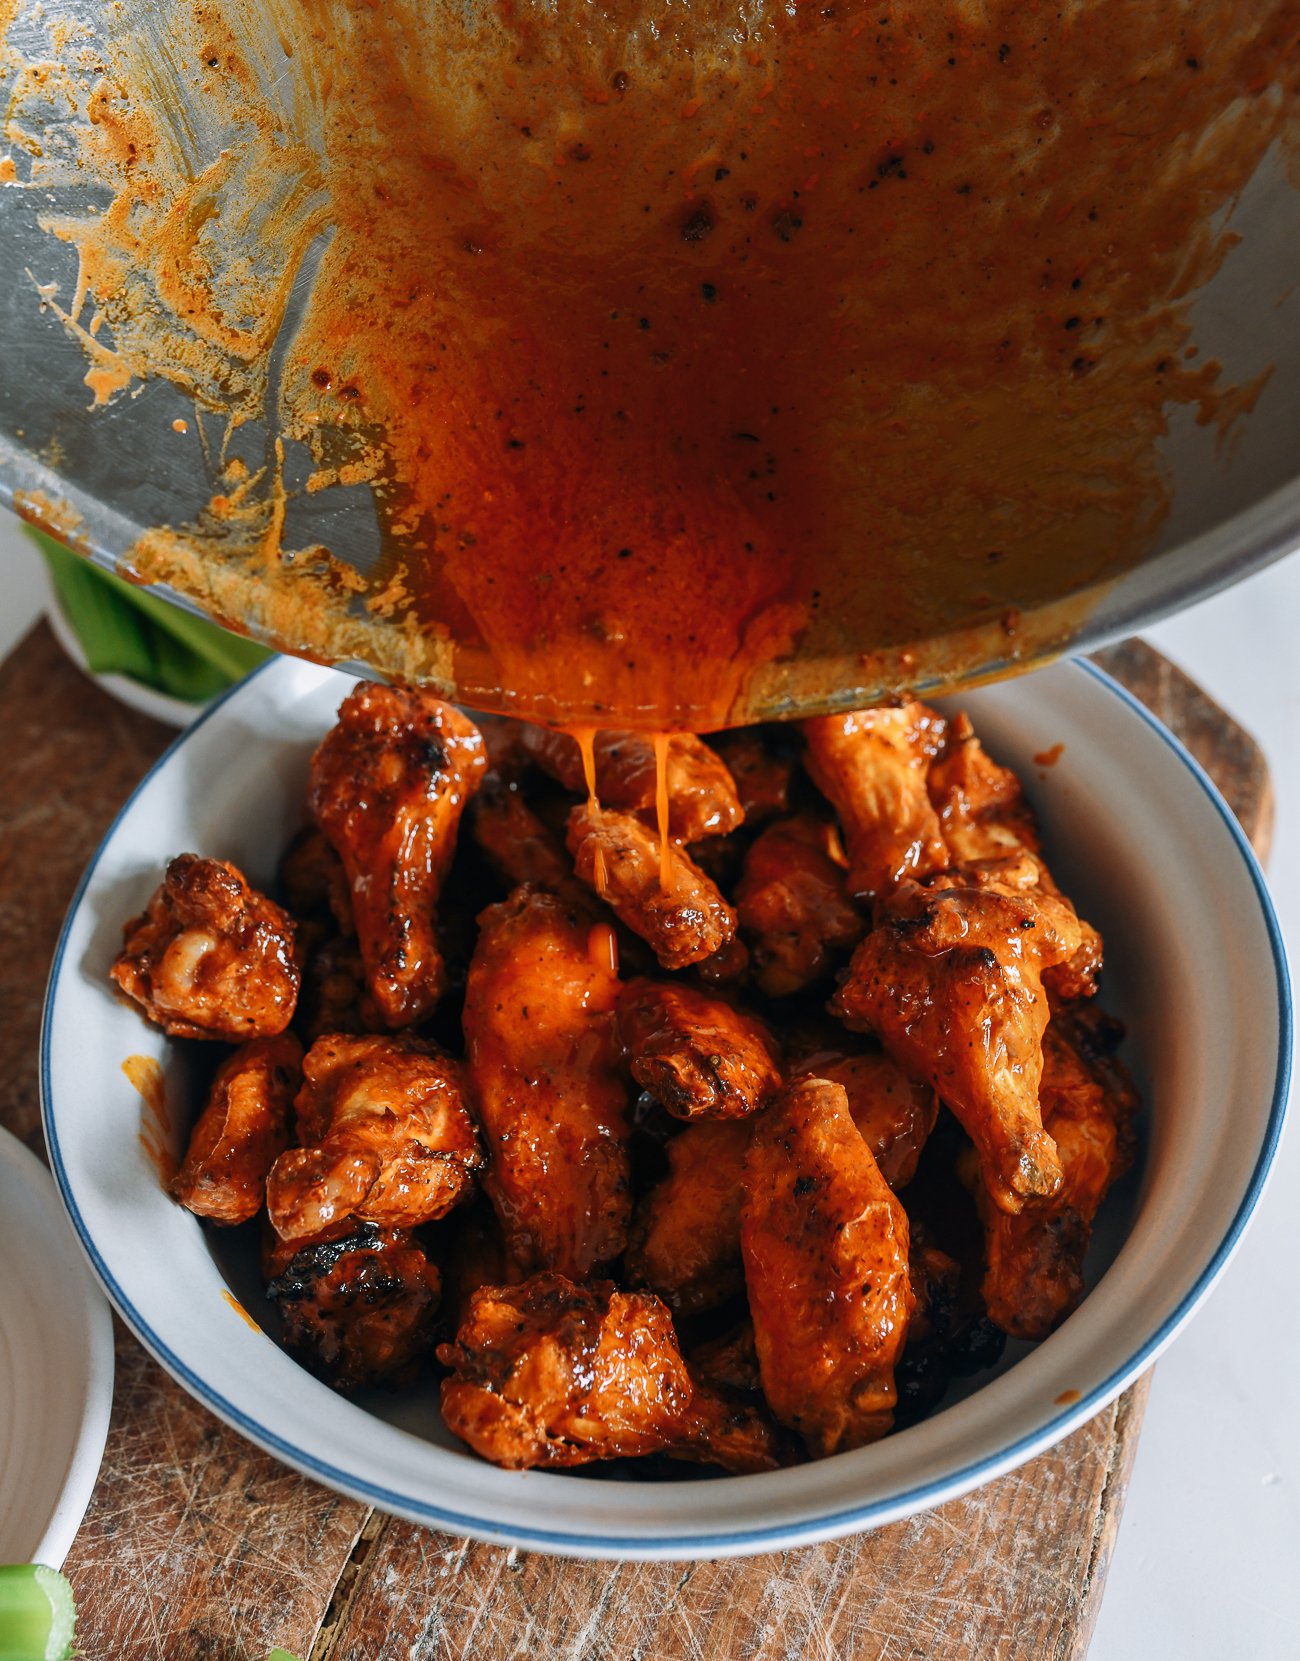 pouring remaining sauce over wings